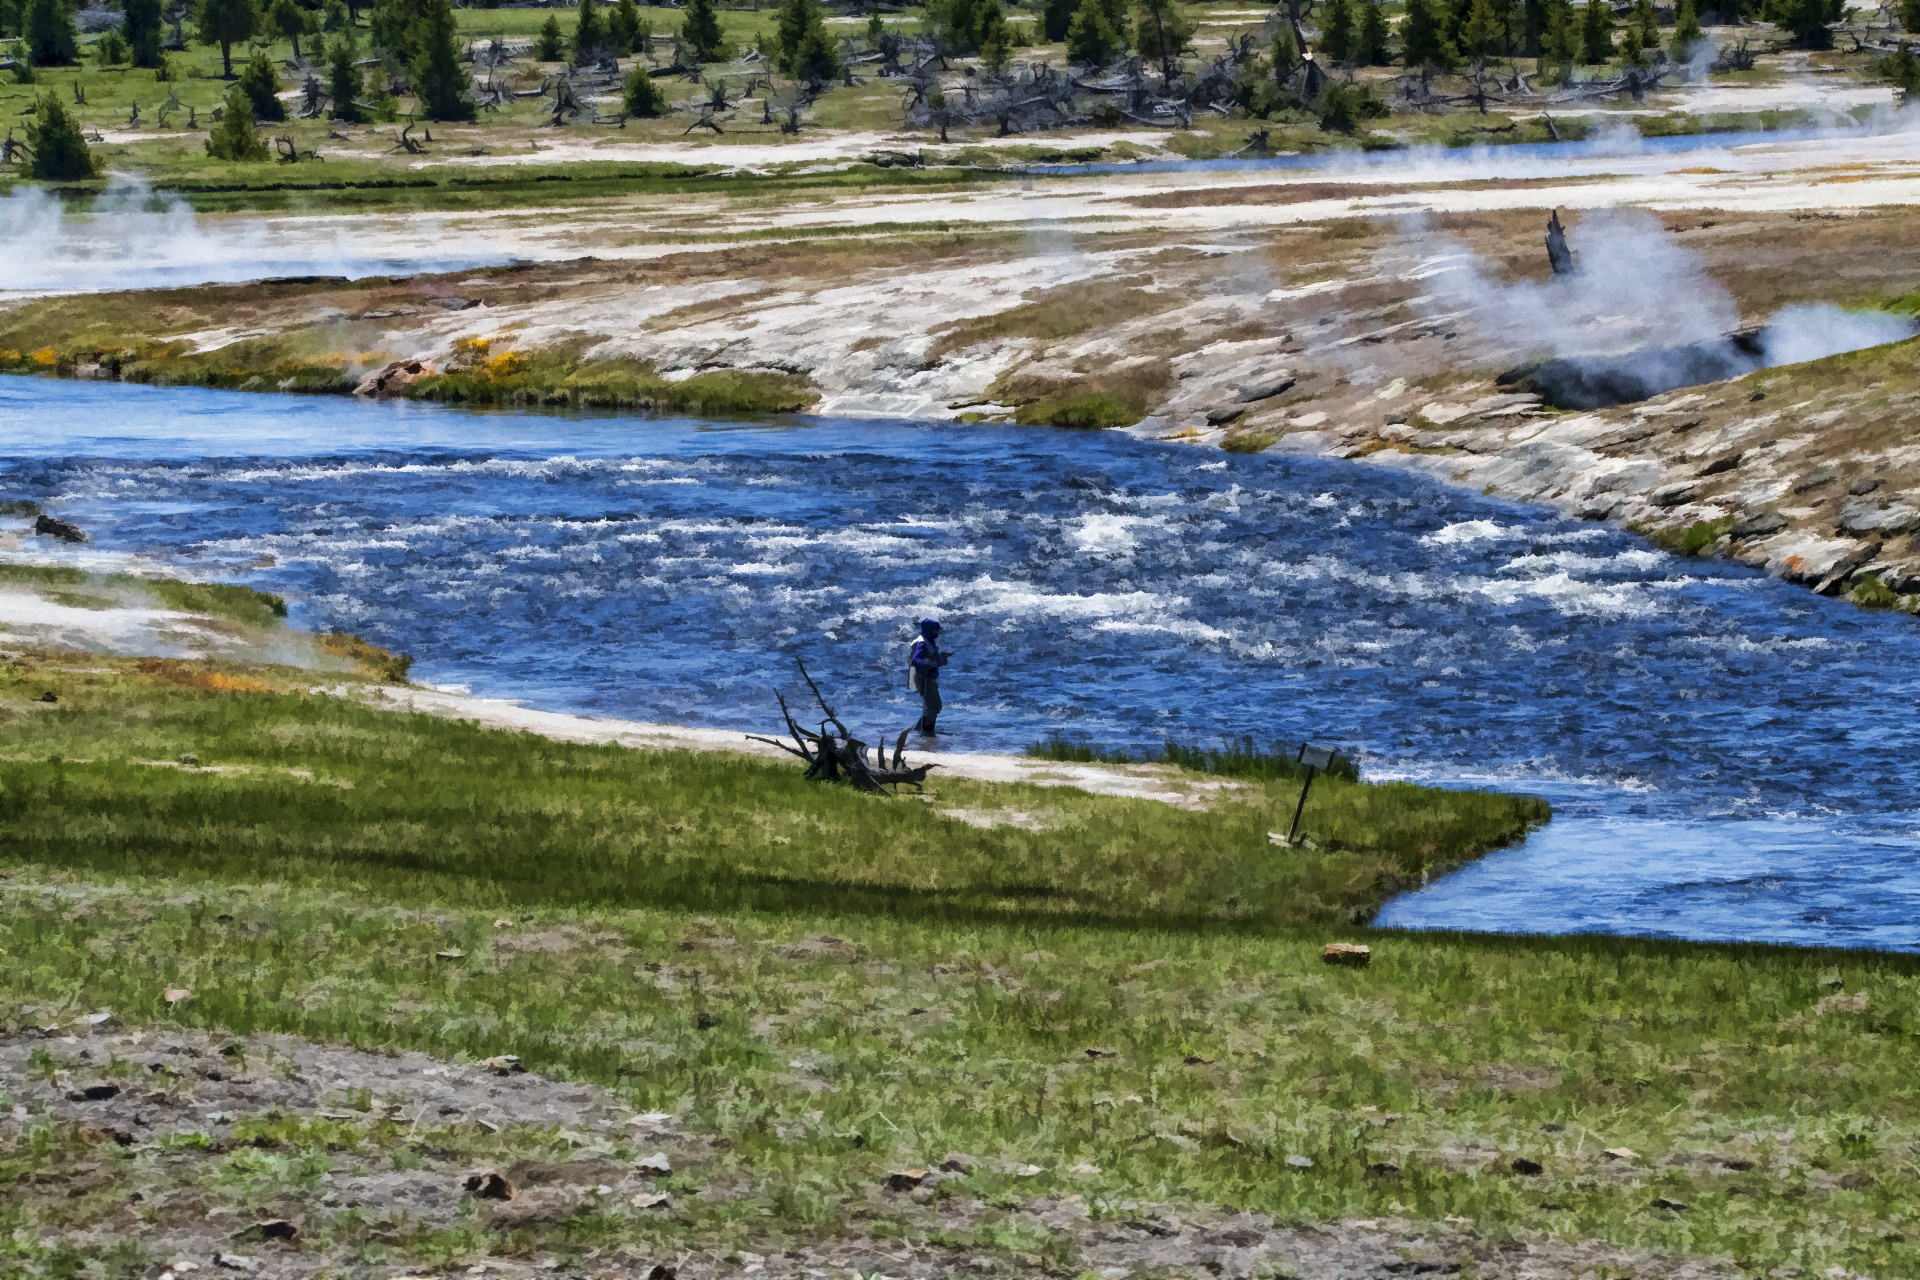 artistic rendering of silhouetted man fishing a river in Yellowstone National Park